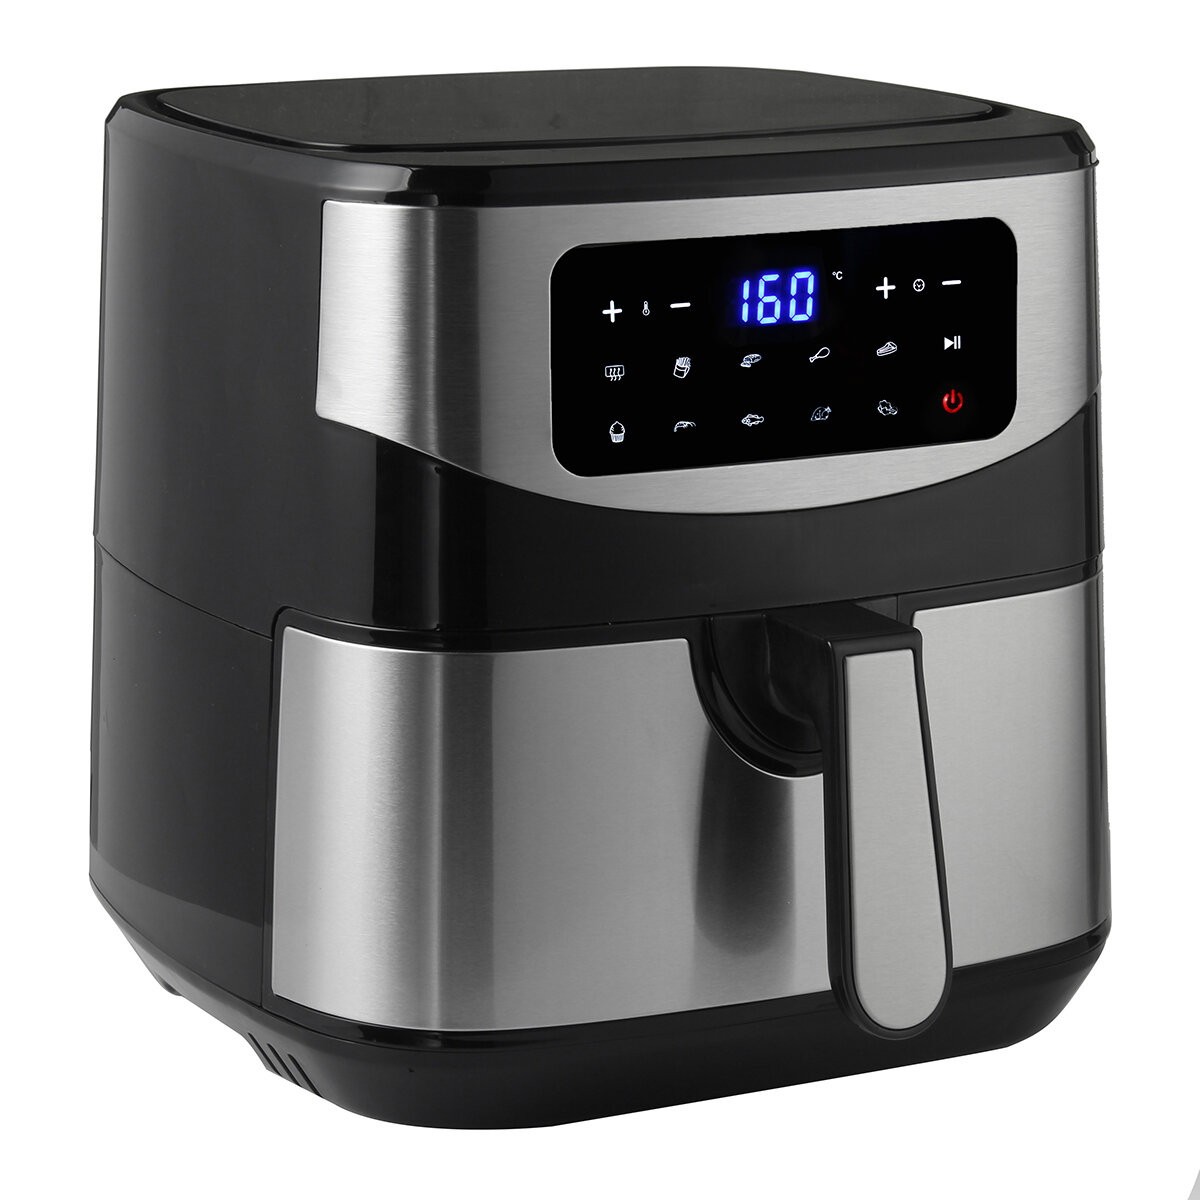 Image of AUGIENB 75L Air Fryer Home Intelligent LED Touch Screen with 10 Cooking Functions Electric Hot Air Fryers Oven Oilless